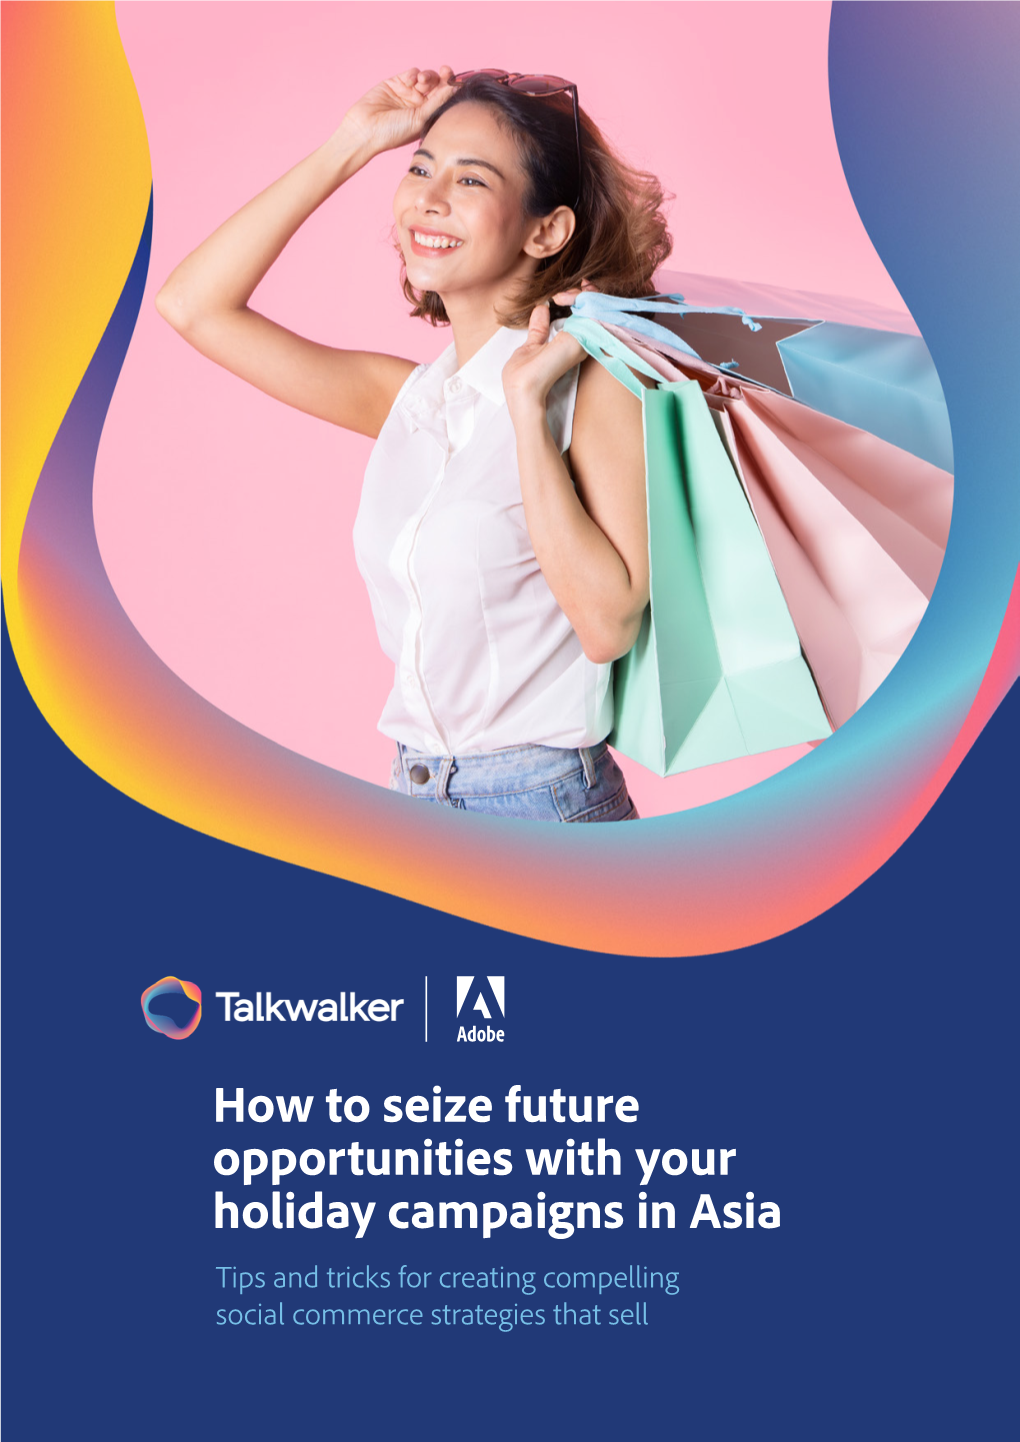 How to Seize Future Opportunities with Your Holiday Campaigns in Asia Tips and Tricks for Creating Compelling Social Commerce Strategies That Sell